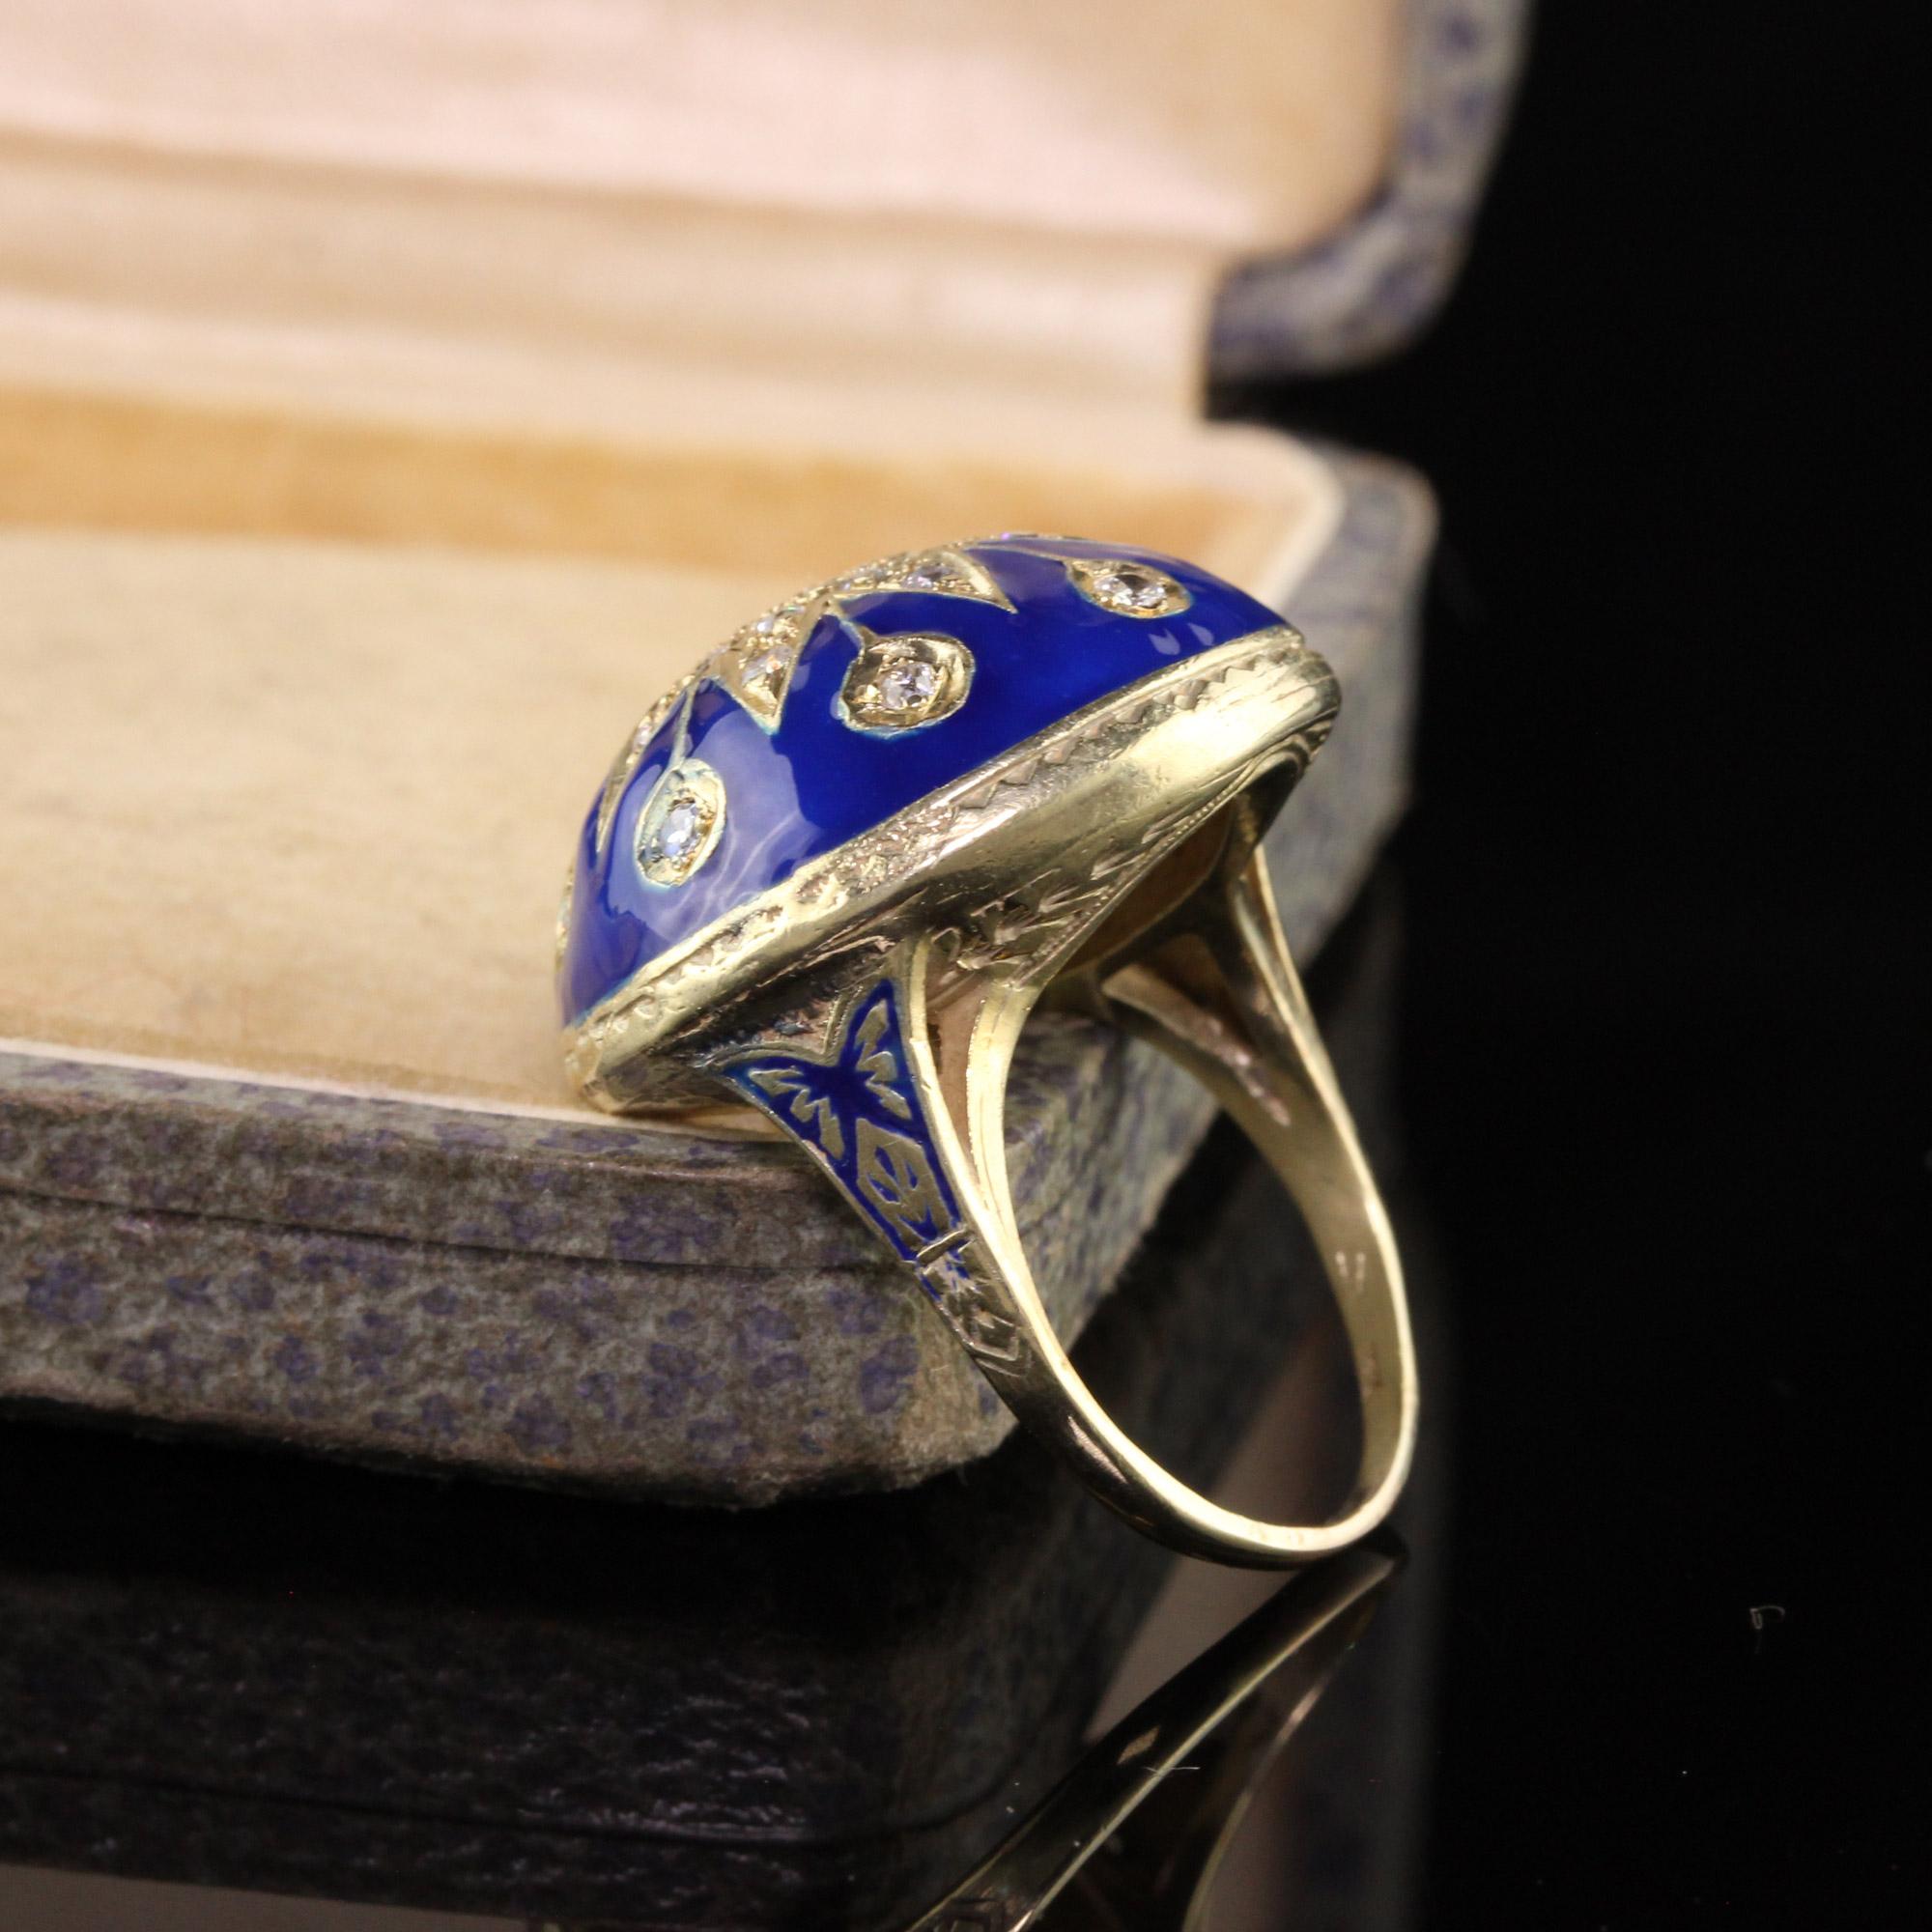 Beautiful Vintage Retro 18K Yellow Gold Enamel and Diamond Cocktail Ring. This unique ring features a flower pattern in the middle of deep blue enamel and has single cut diamonds on it.

Item #R0848

Metal: 18K Yellow Gold

Diamond: Approximately